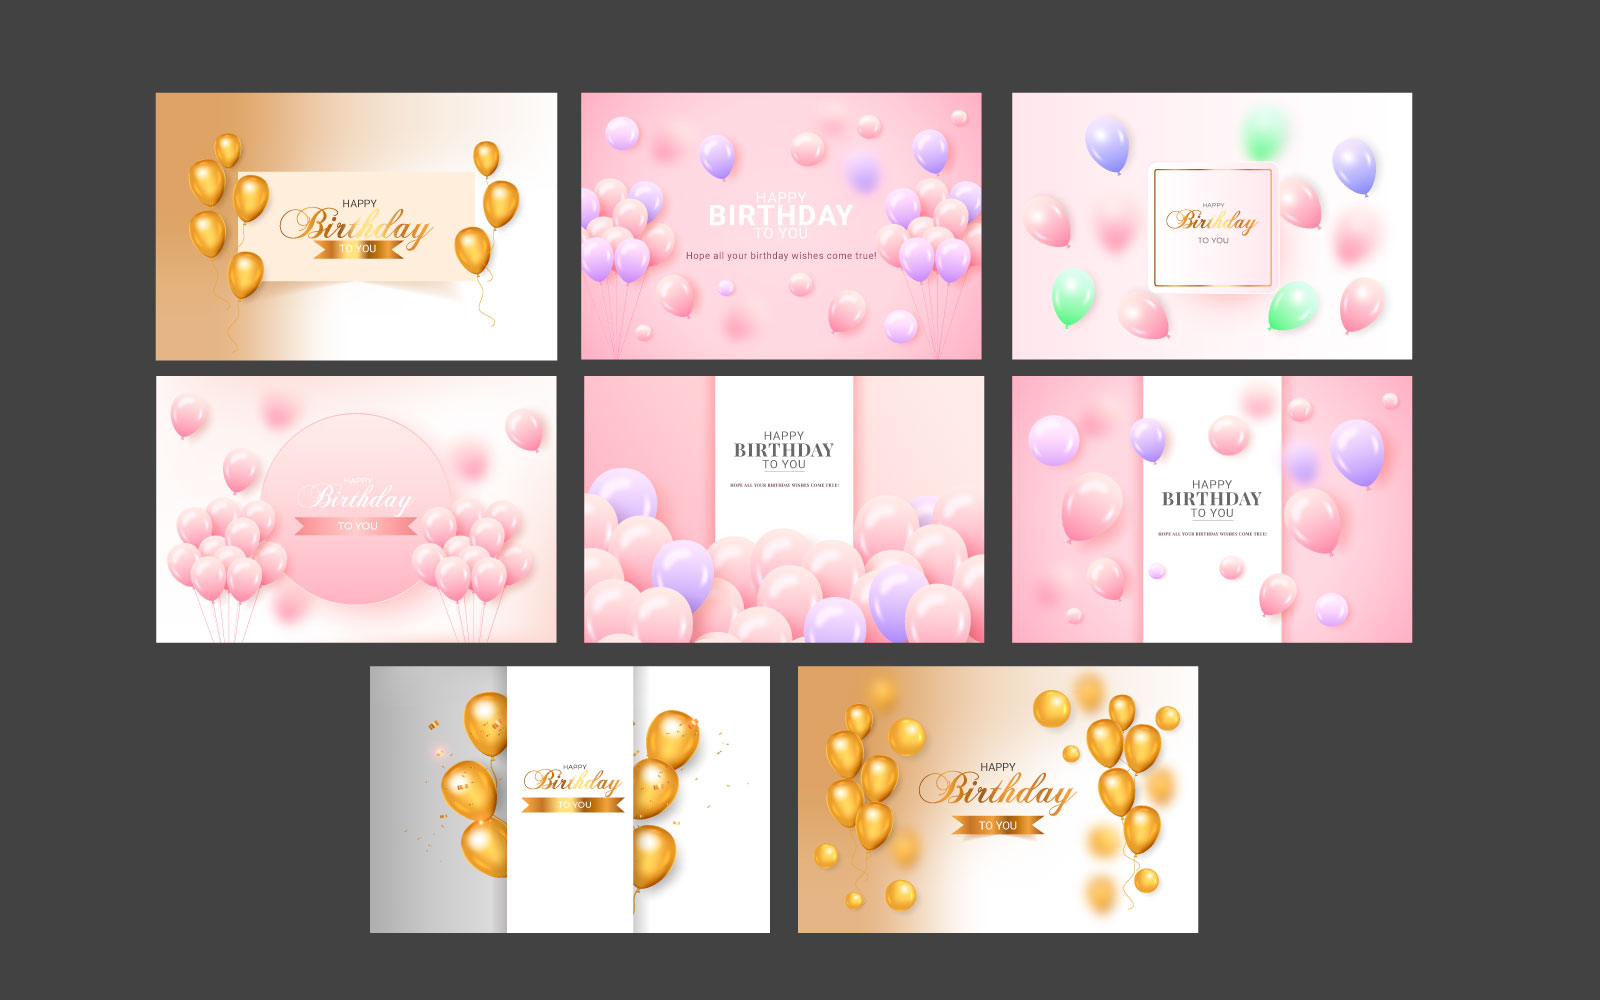 Birthday vector banner template set. Happy birthday to you text in white space background concept